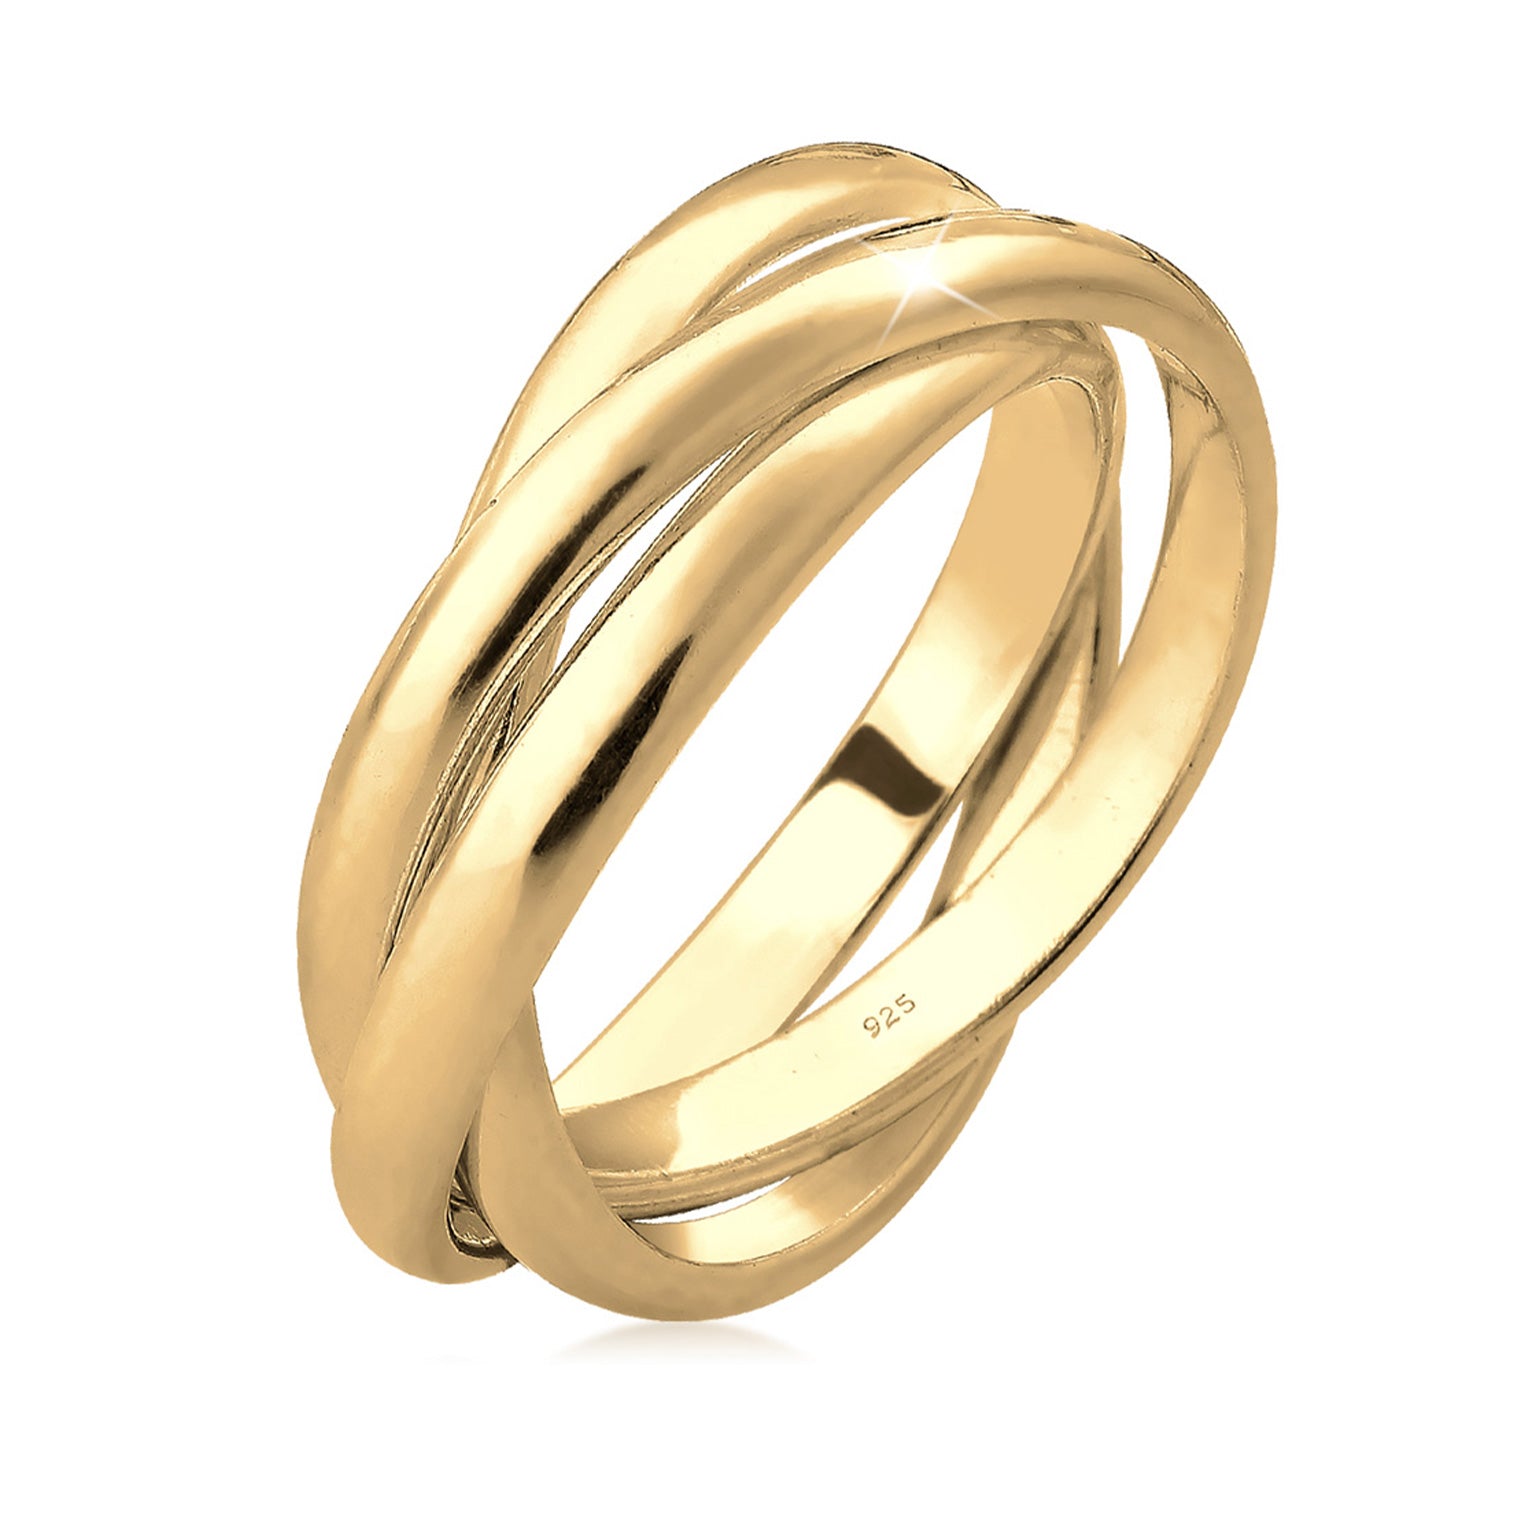 Rings made of silver or gold | buy from Elli | TOP selection – Elli Jewelry | Silberringe